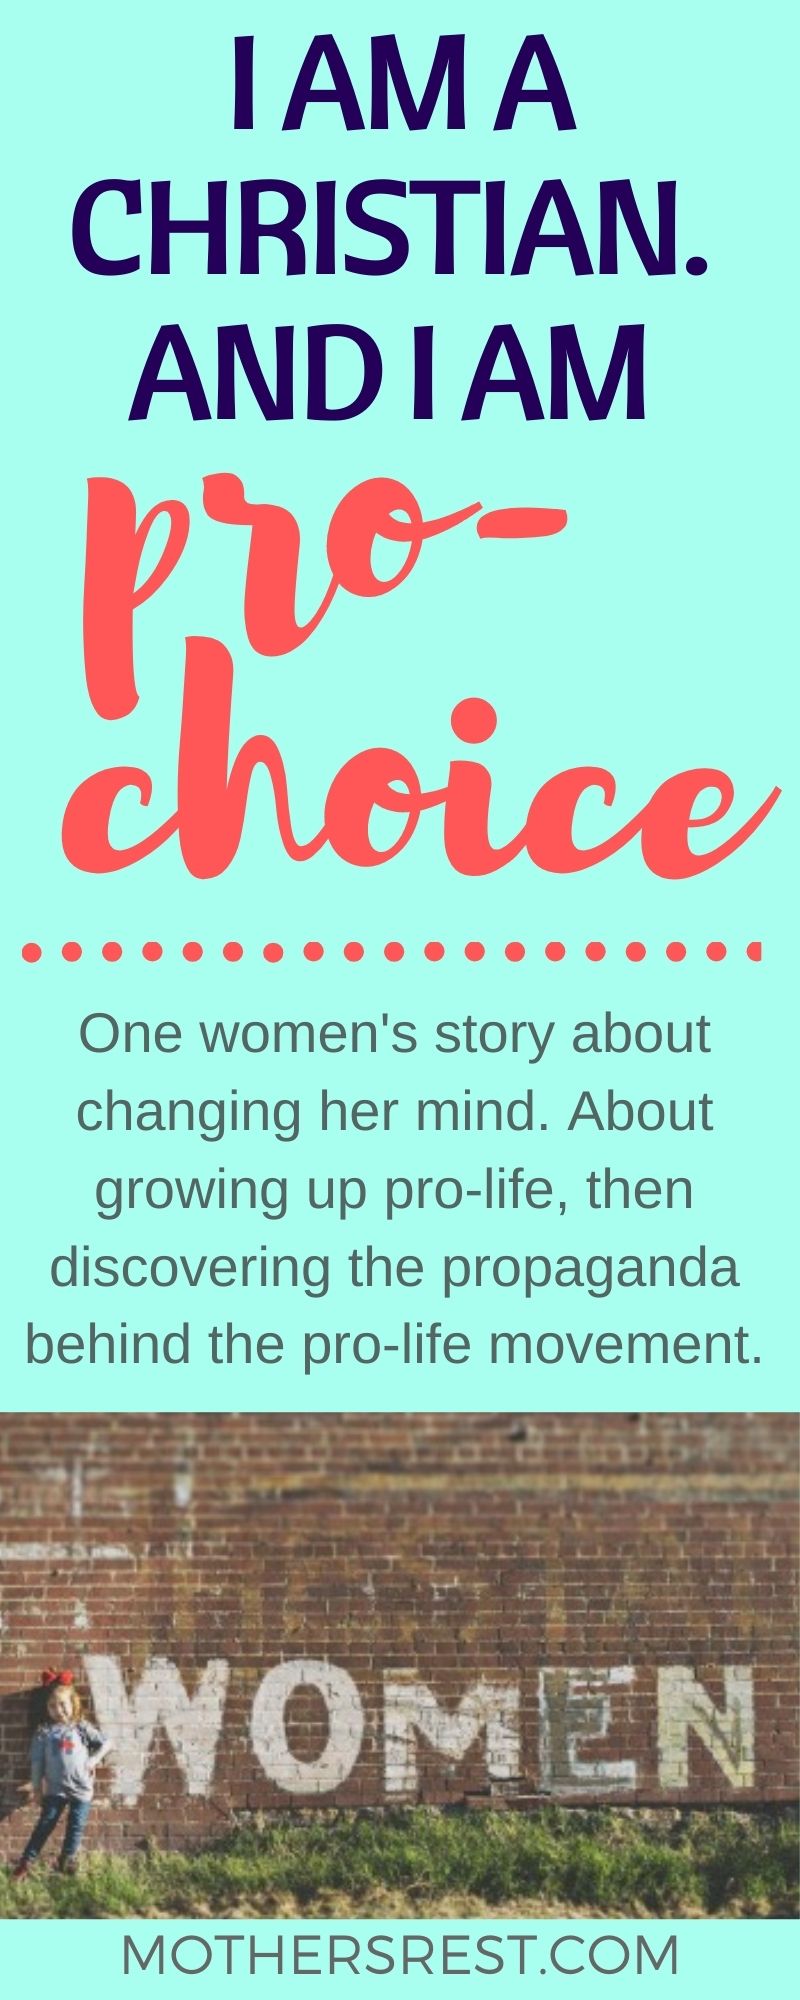 How one women changed her mind. How she grew up pro-life, then discovered the propaganda behind the pro-life movement.